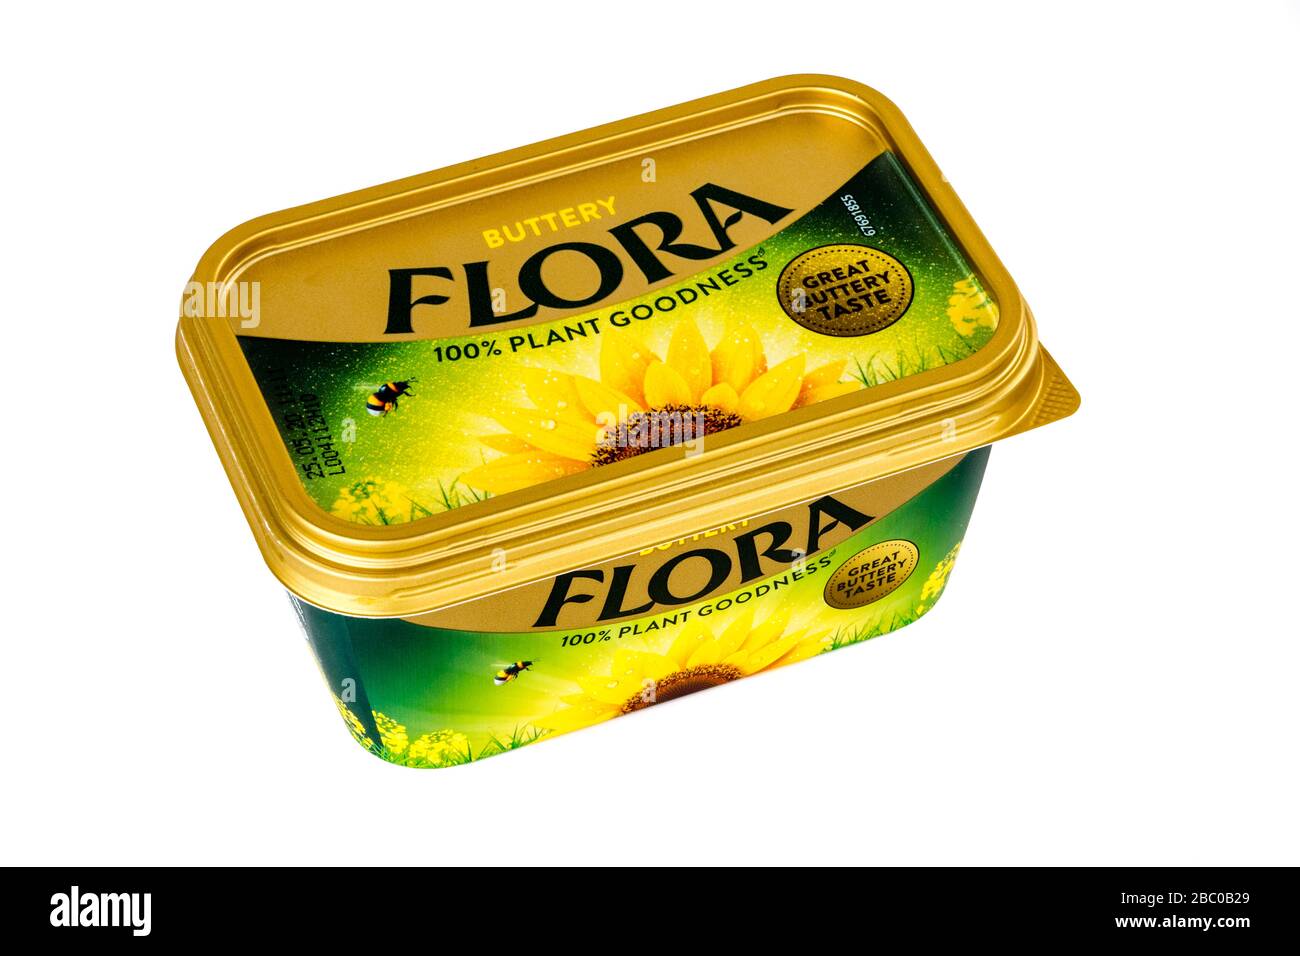 Flora margarine, Flora margarine tub, margarine tub, Flora buttery, Flora, margarine, tub, brand, logo, Flora butter, White background, copy space, Stock Photo